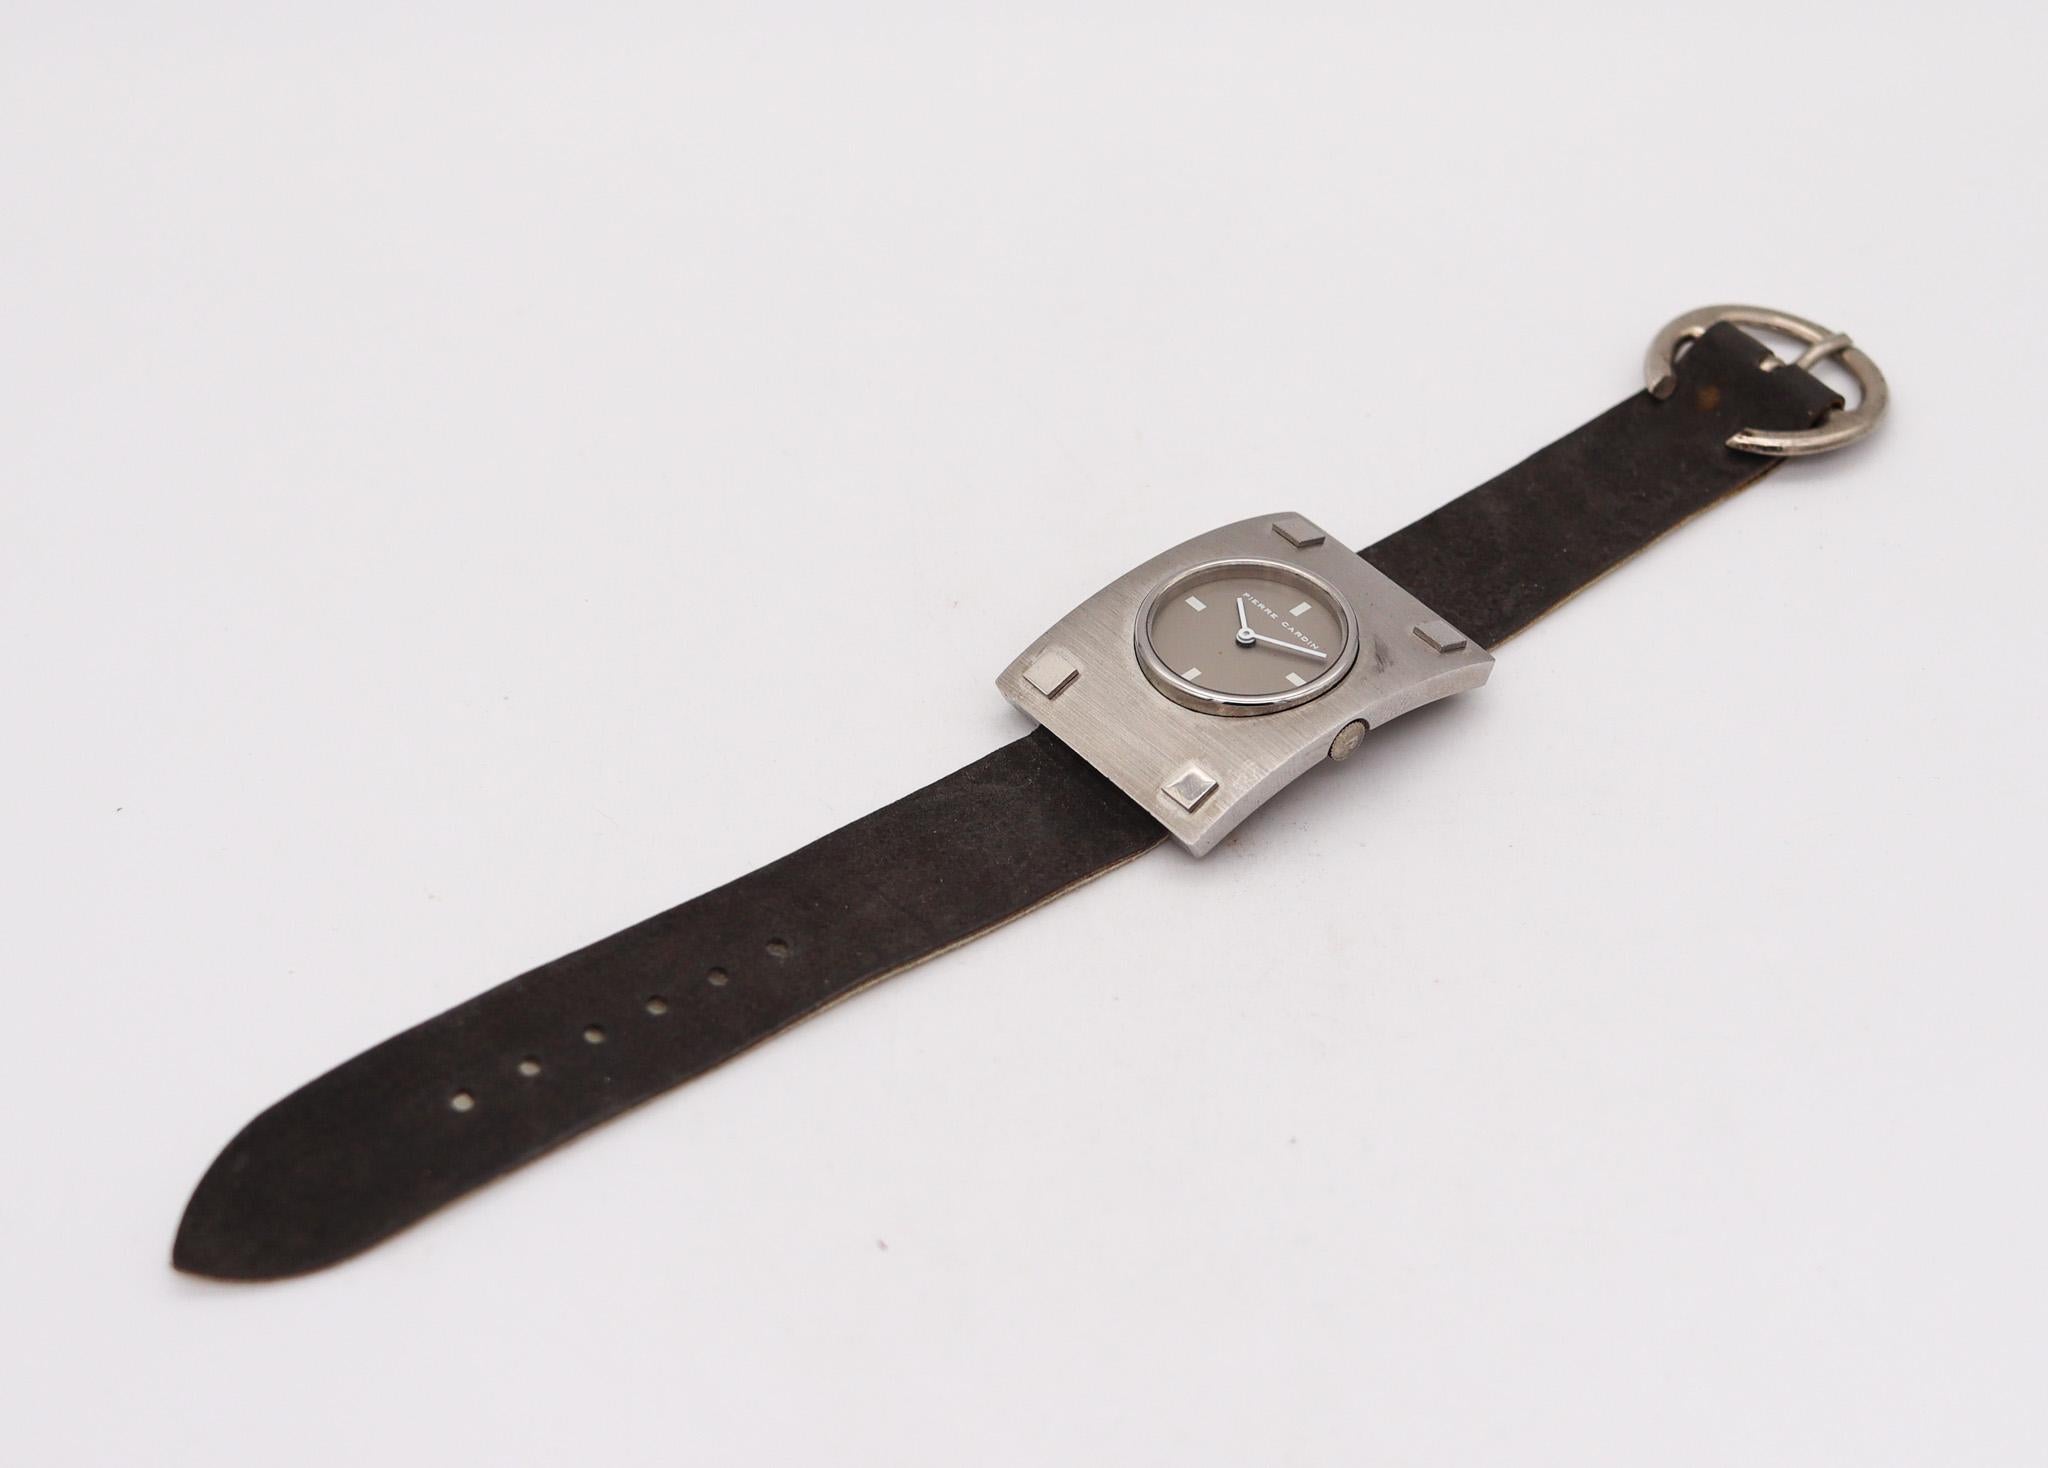 Jaeger LeCoultre PC123 wrist watch designed by Pierre Cardin.

Fabulous retro wrist watch, designed in France by fashion designer Pierre Cardin, back in the 1971. This beautiful and rare watch is the Pierre Cardin model PC123, and was crafted with a